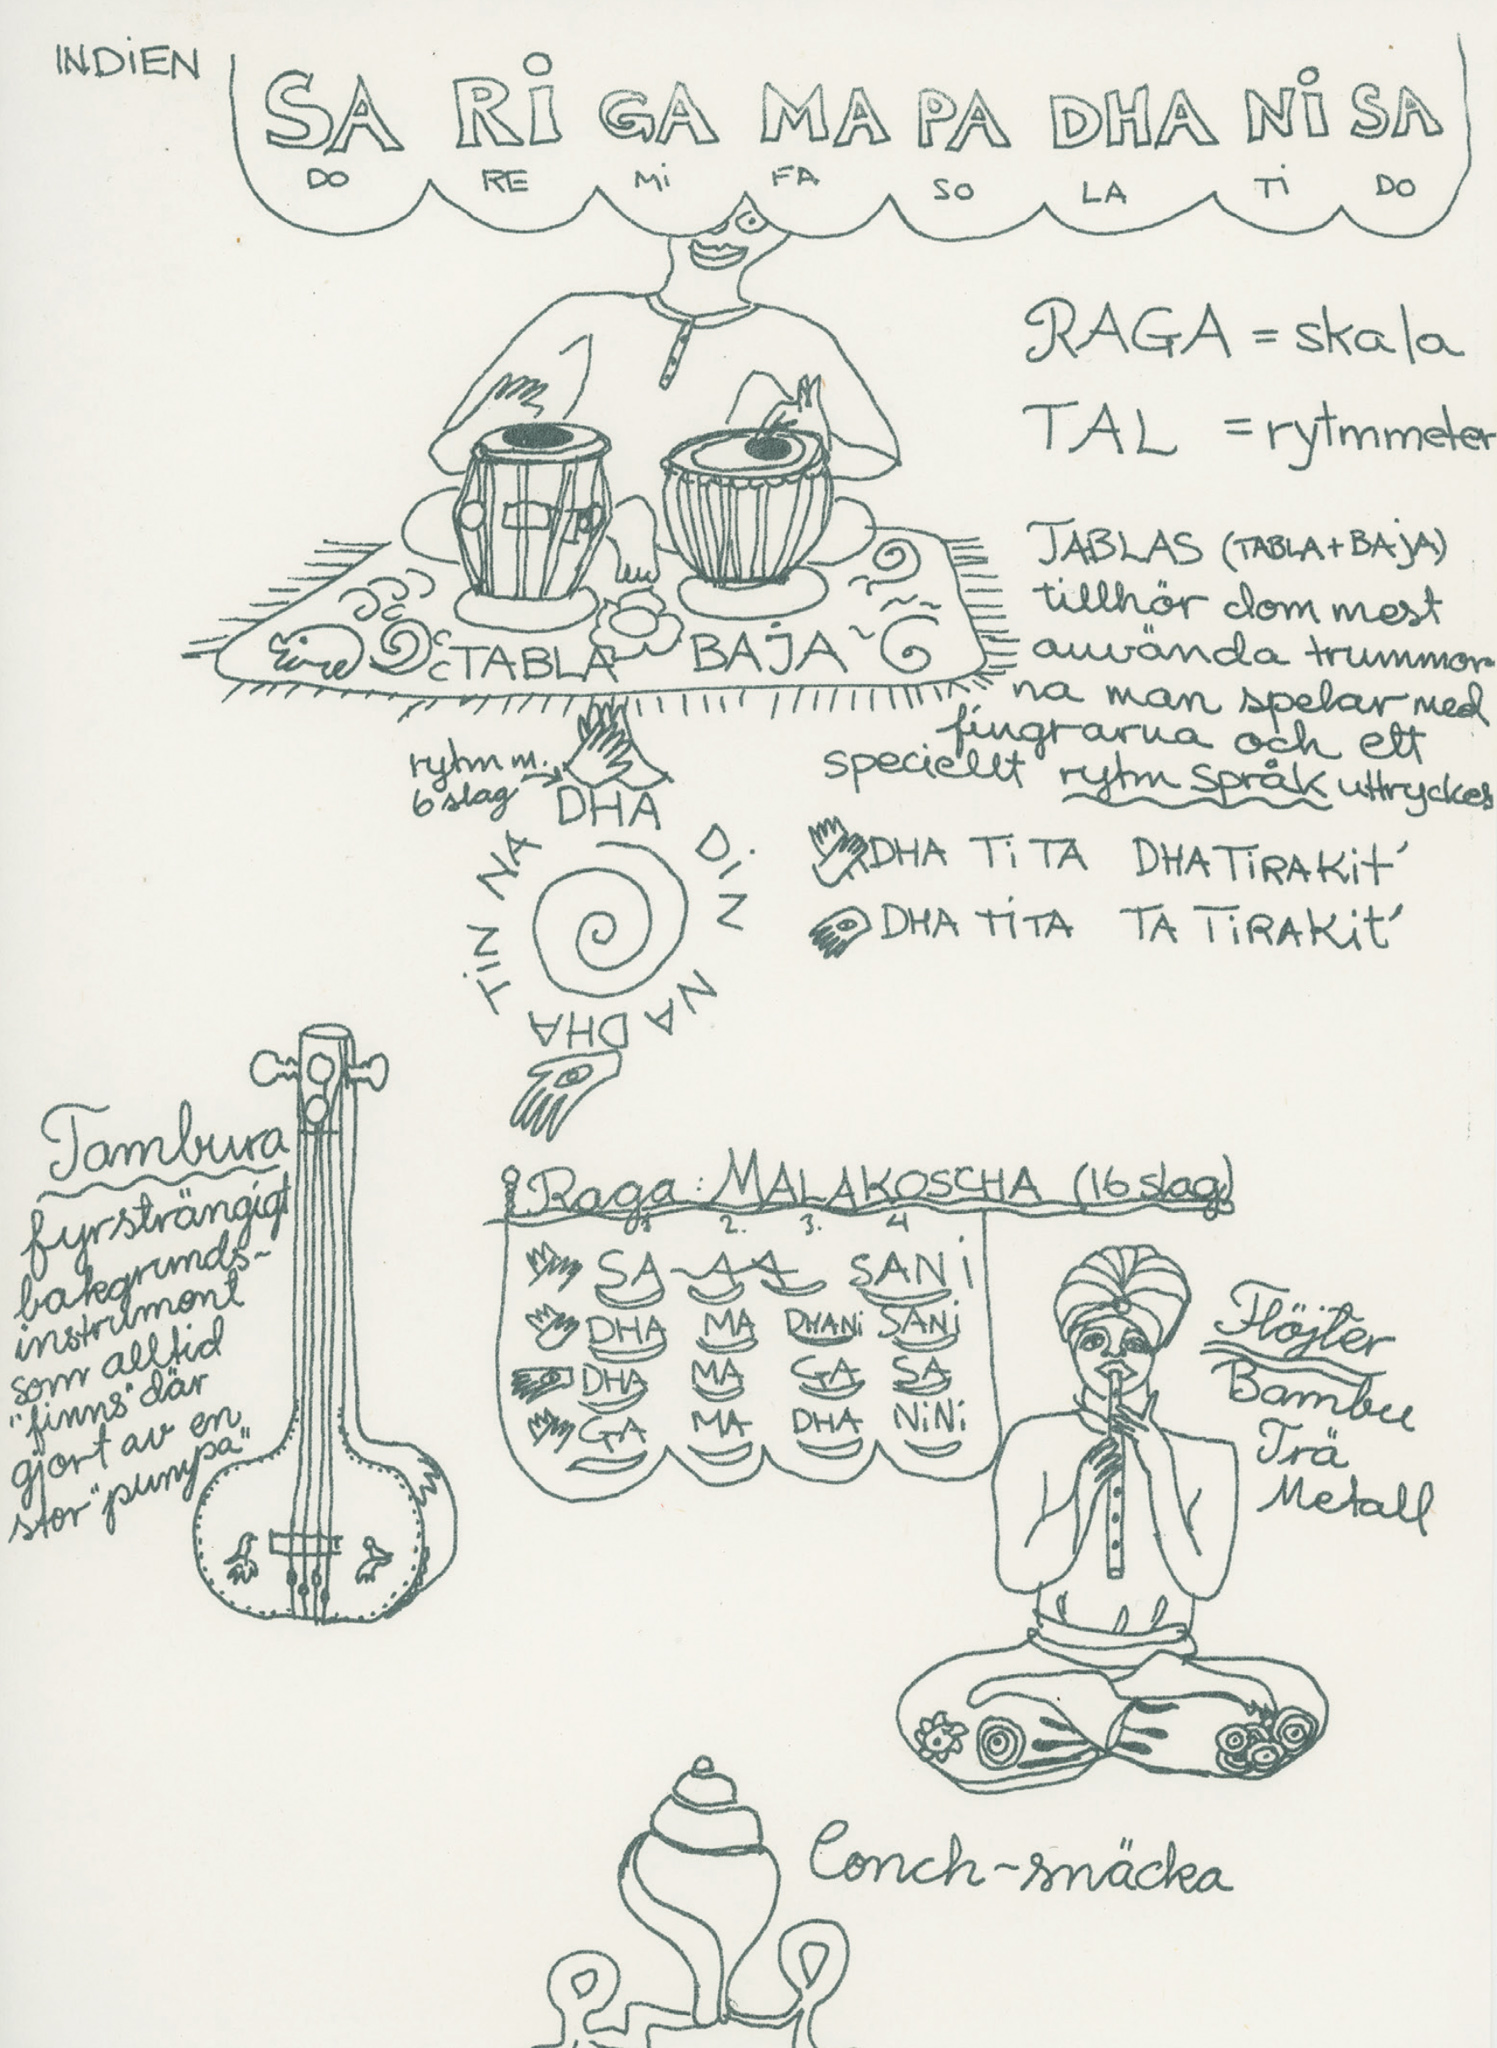 Children’s workshop handout depicting instruments from around the world with illustrations by Christer Bothén and Moki Cherry, ca. 1973.